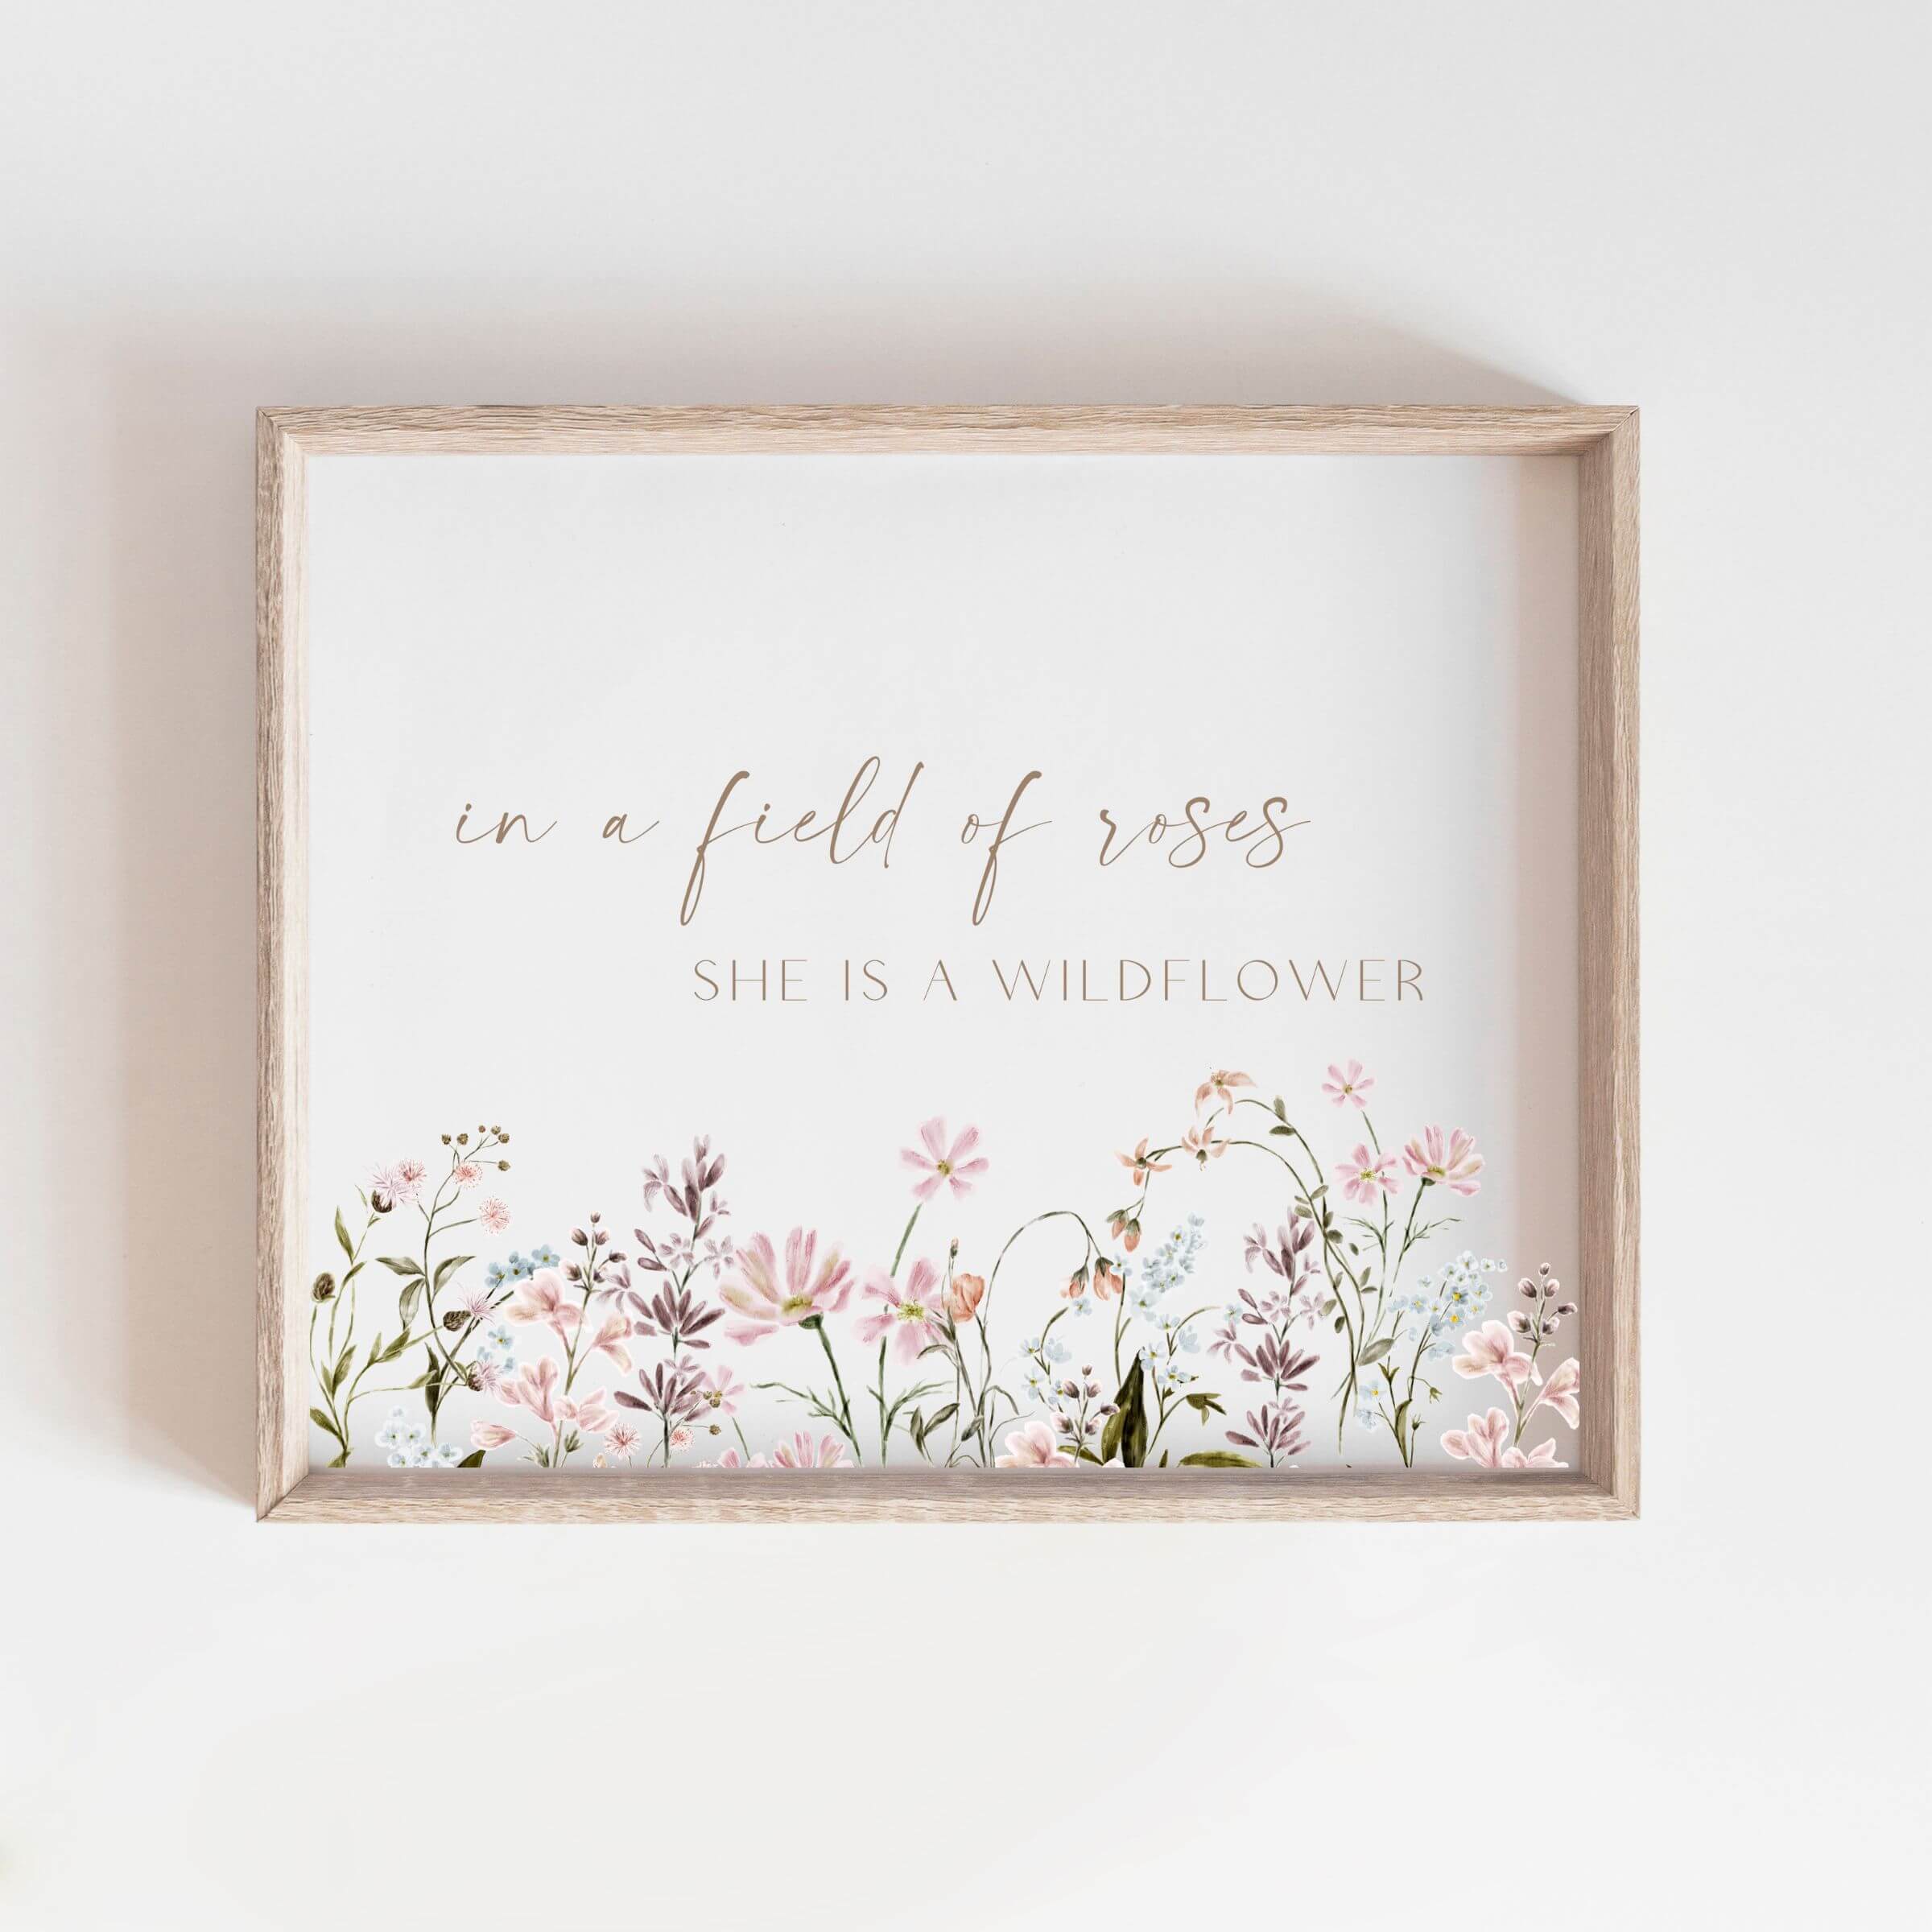 In a field of roses she is a wildflower Art Print by Standard Prints /  Posters